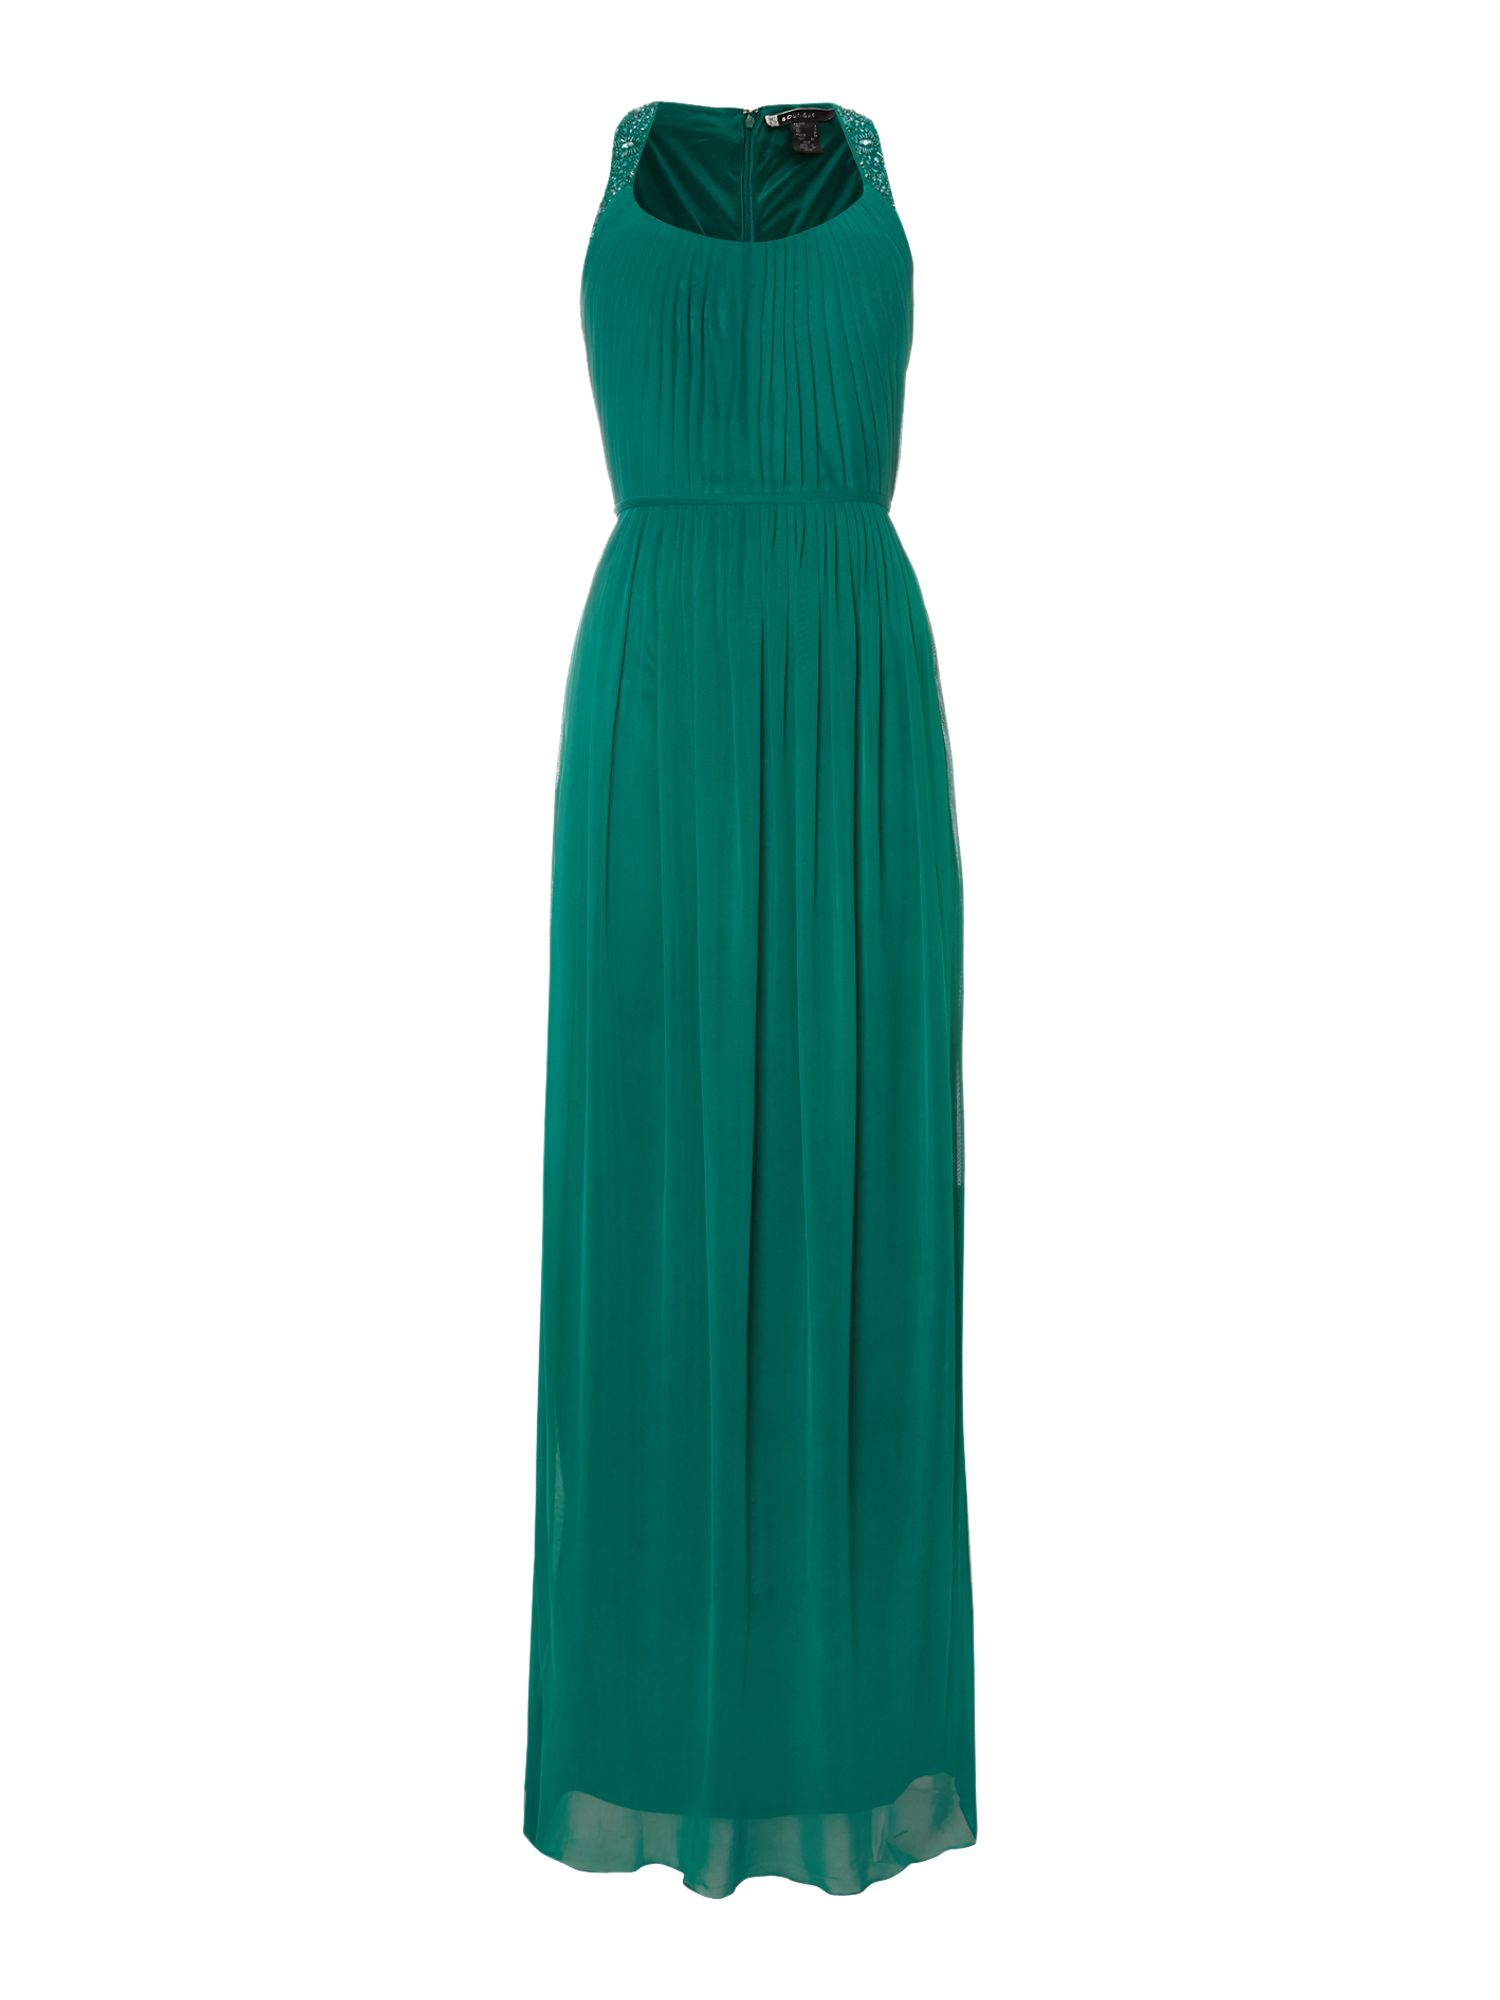 Js Collections Beaded Halter Neck Dress in Green (Emerald) | Lyst